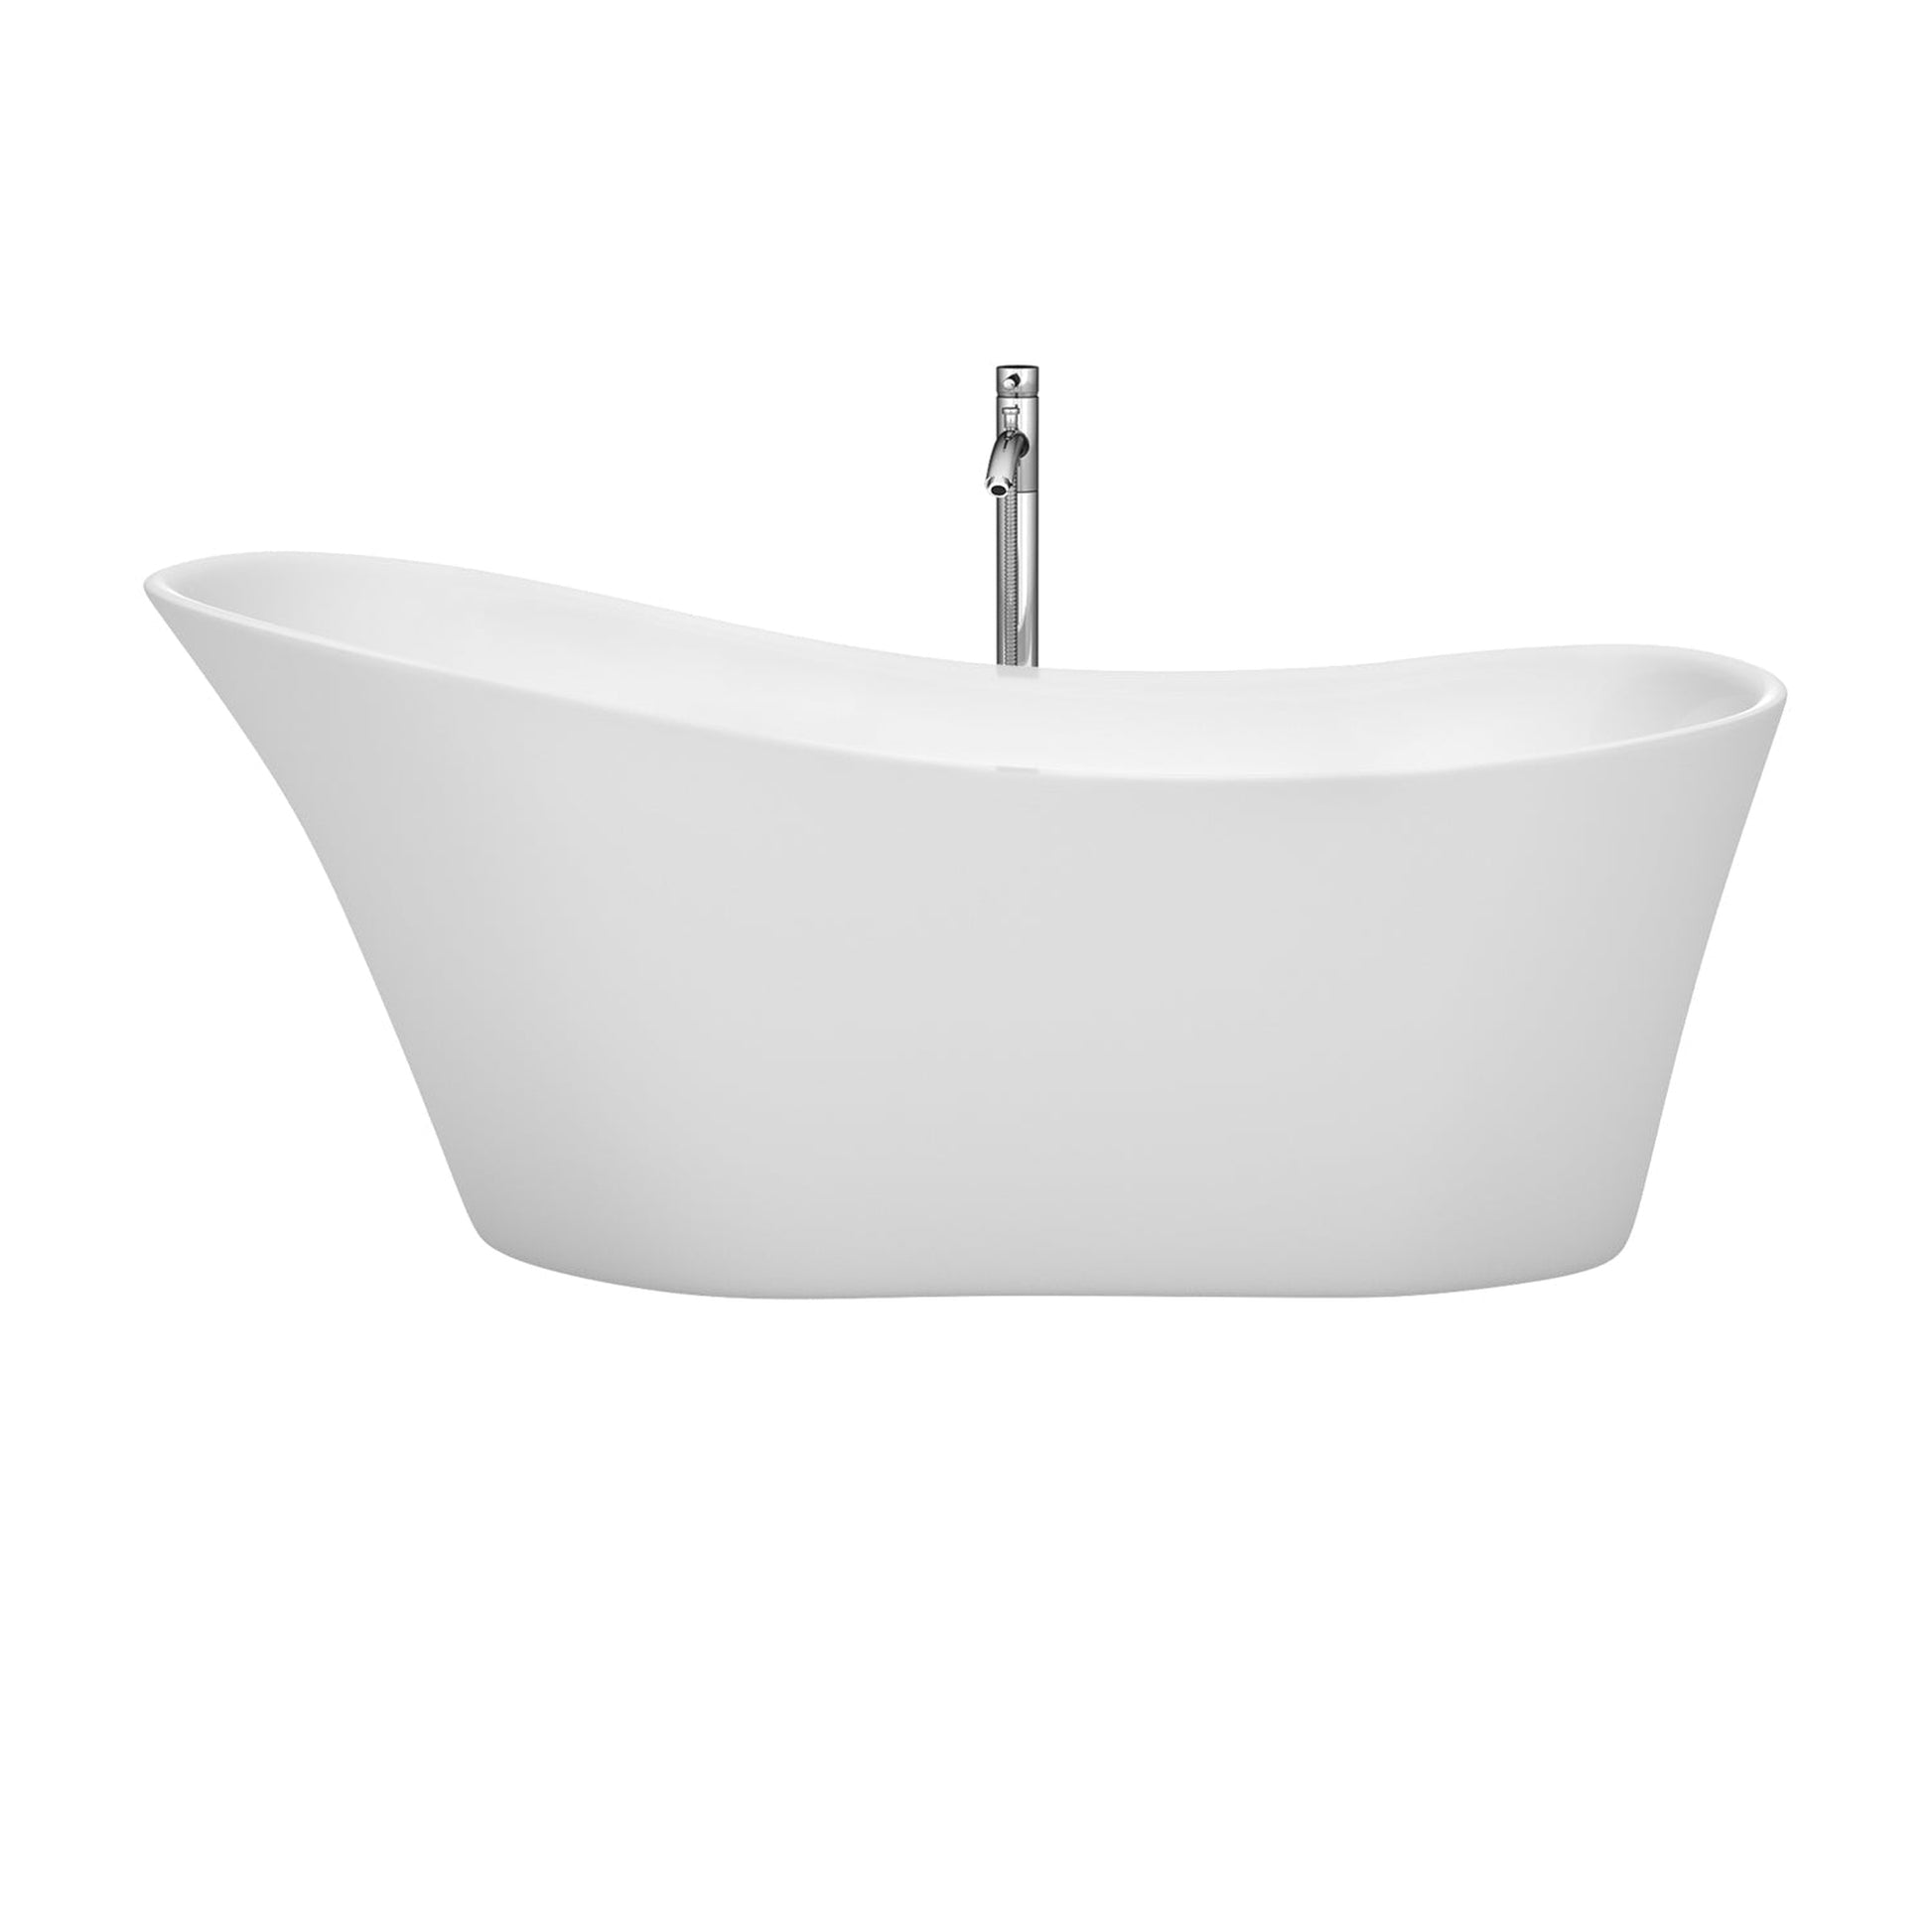 Wyndham Collection Janice 67" Freestanding Bathtub in White With Floor Mounted Faucet, Drain and Overflow Trim in Polished Chrome